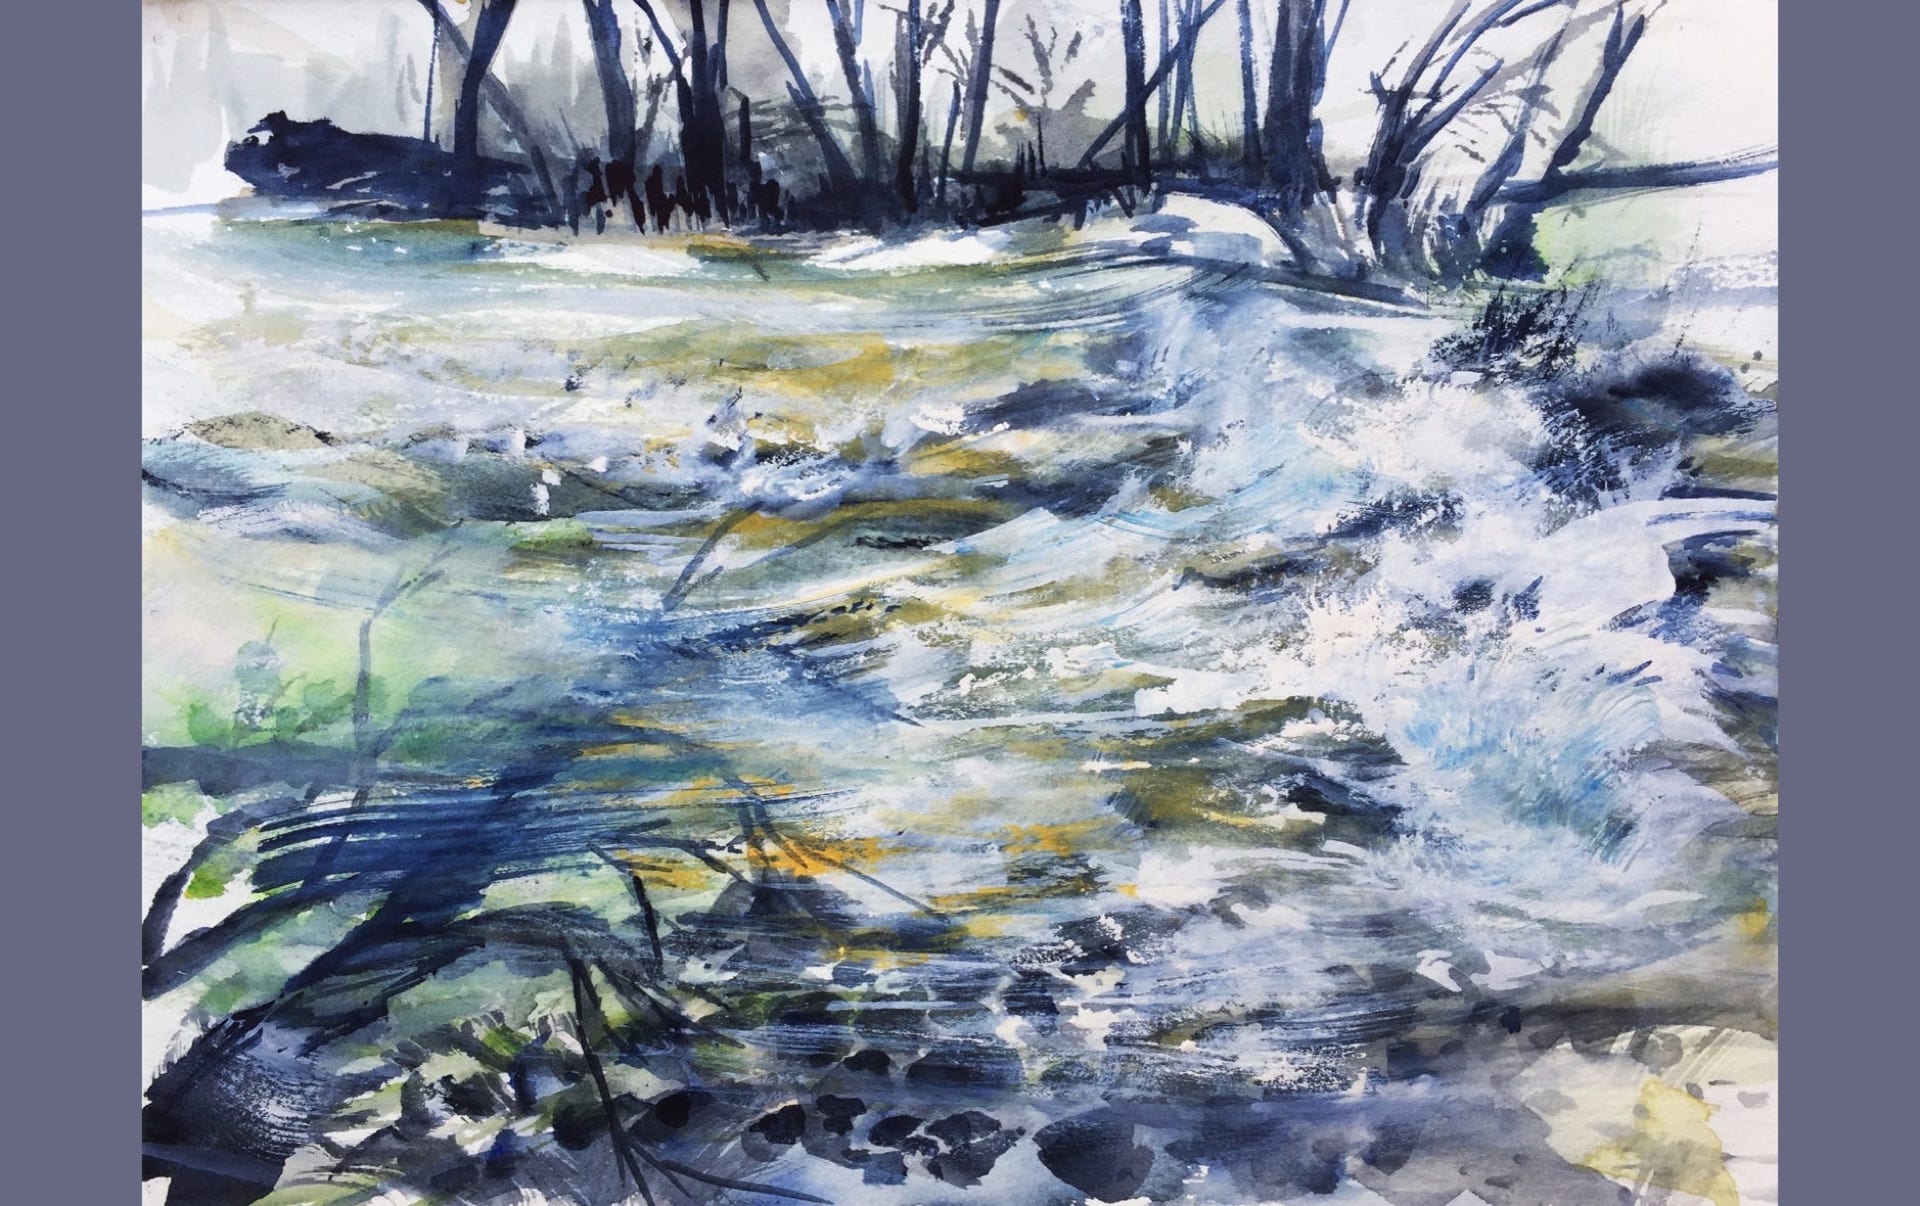 Rapids on the American River, watercolor painting by Annette